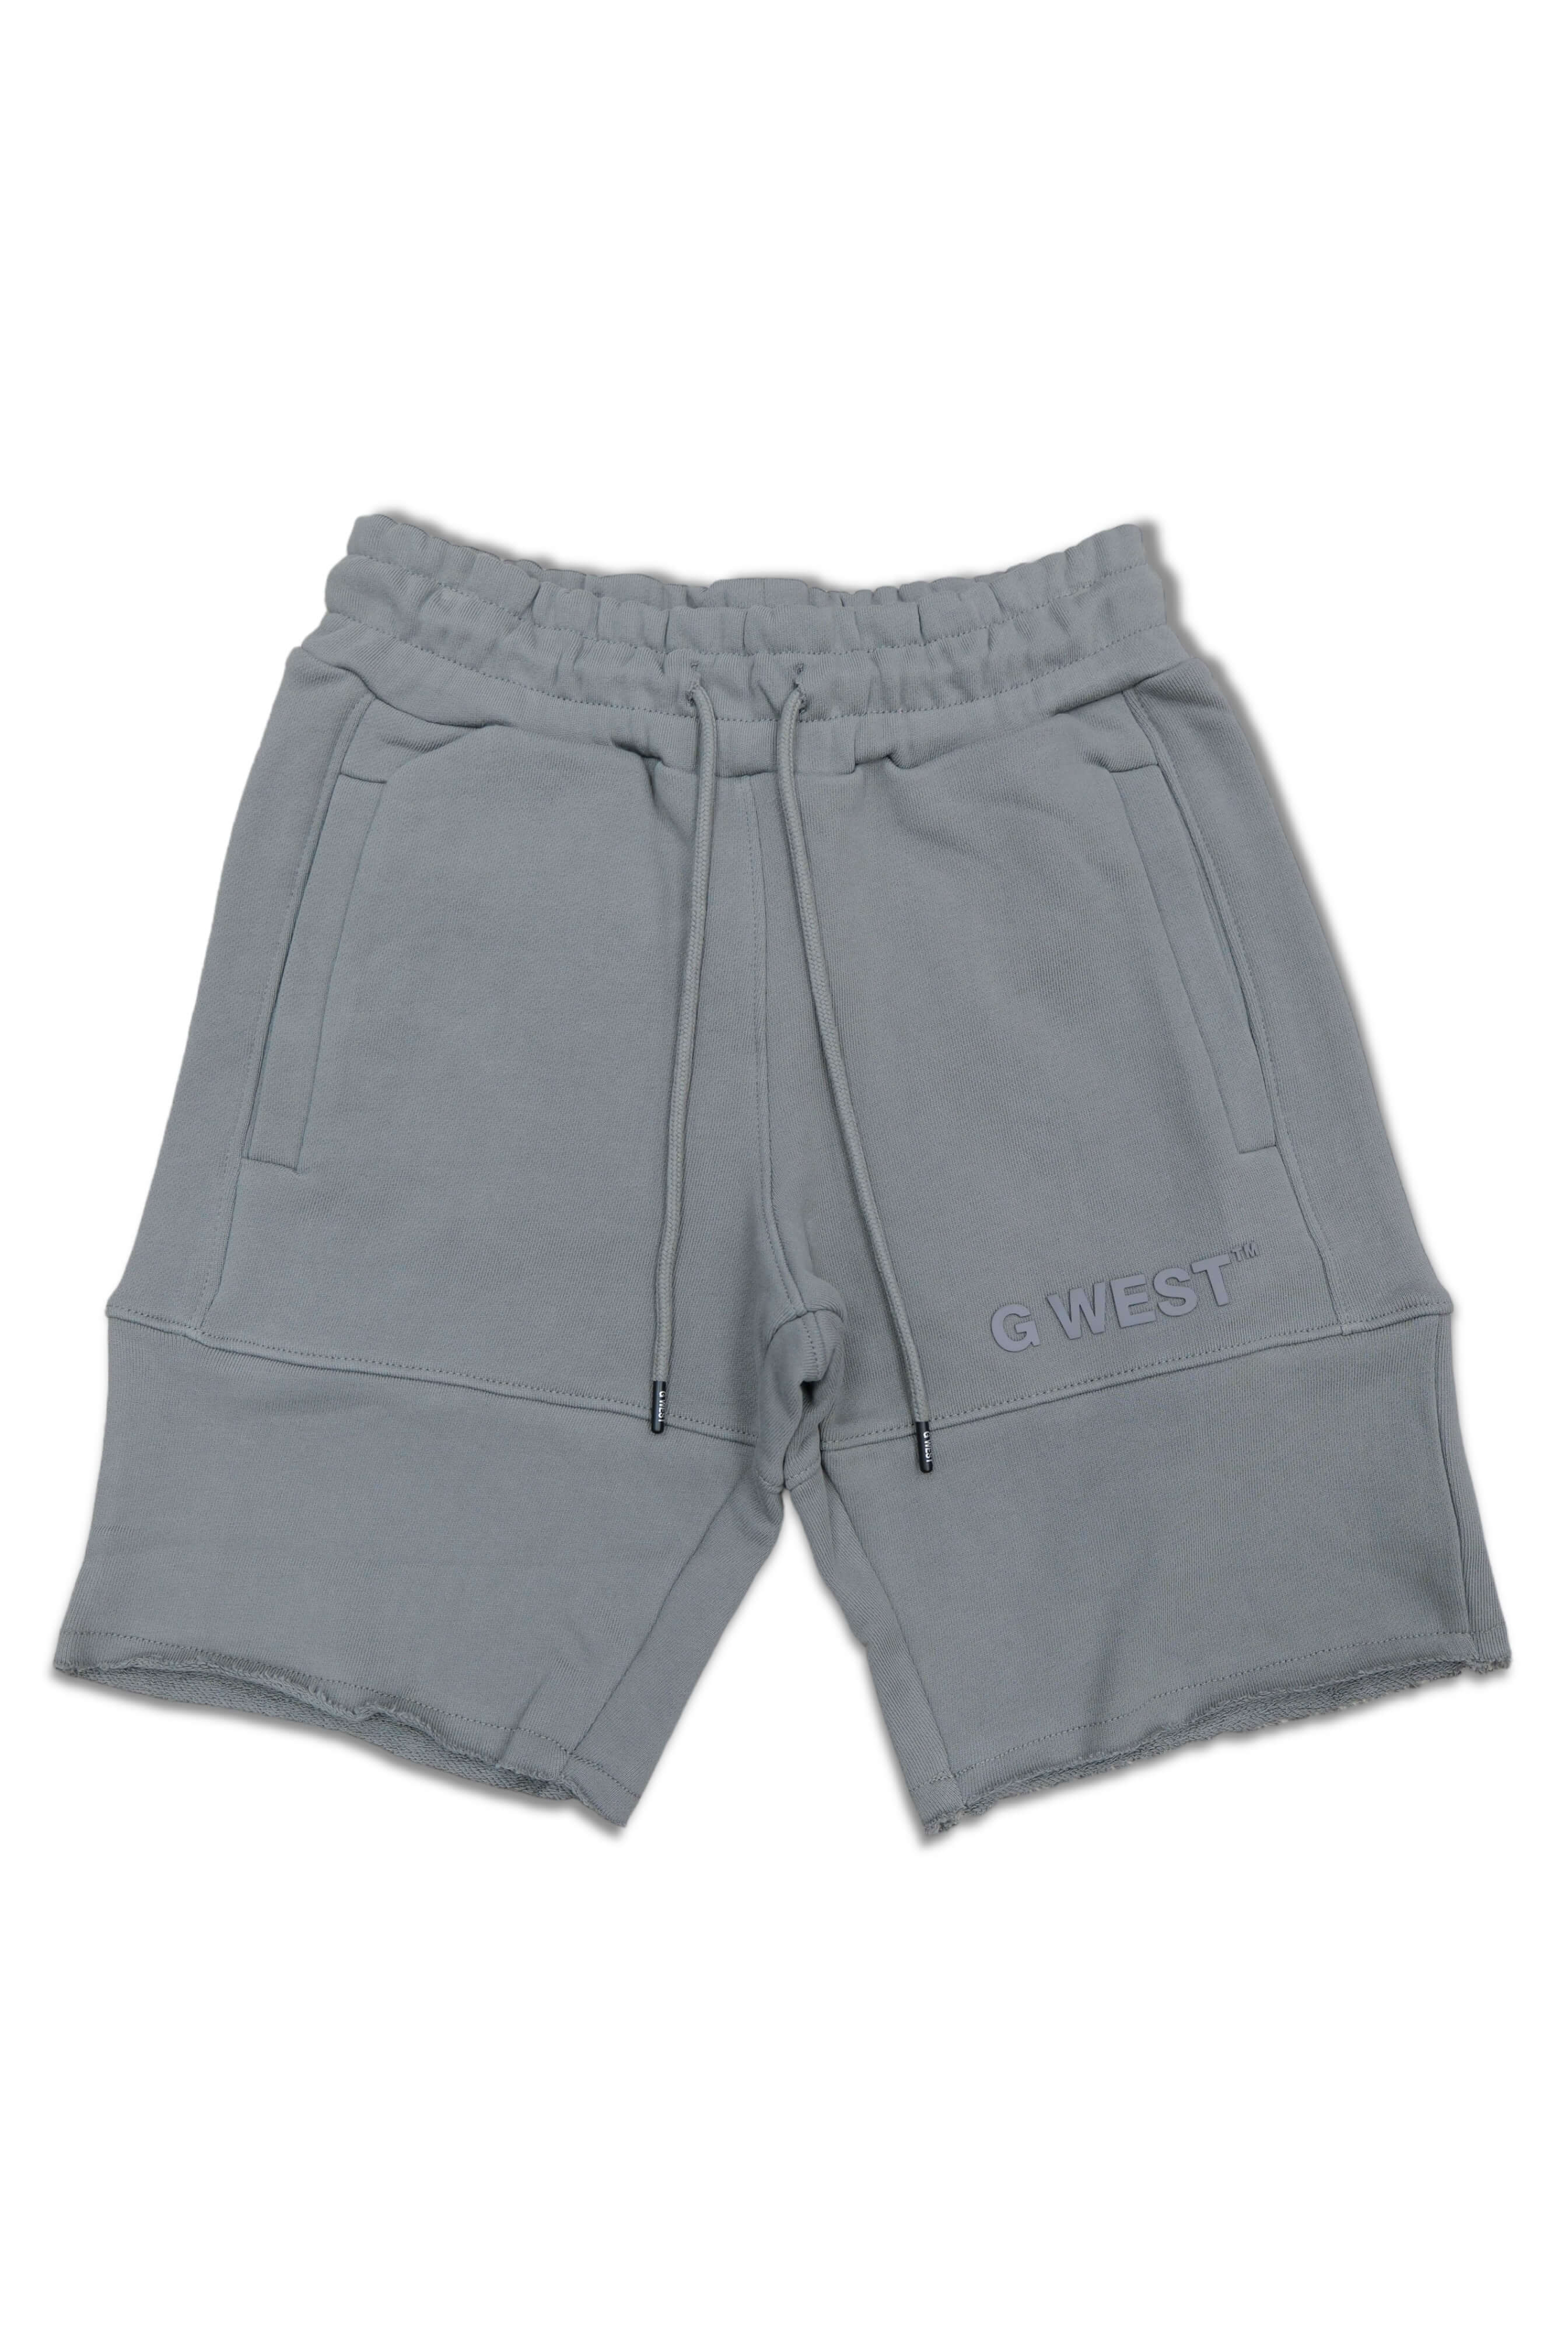 G West Sweat Shorts - Charcoal Grey